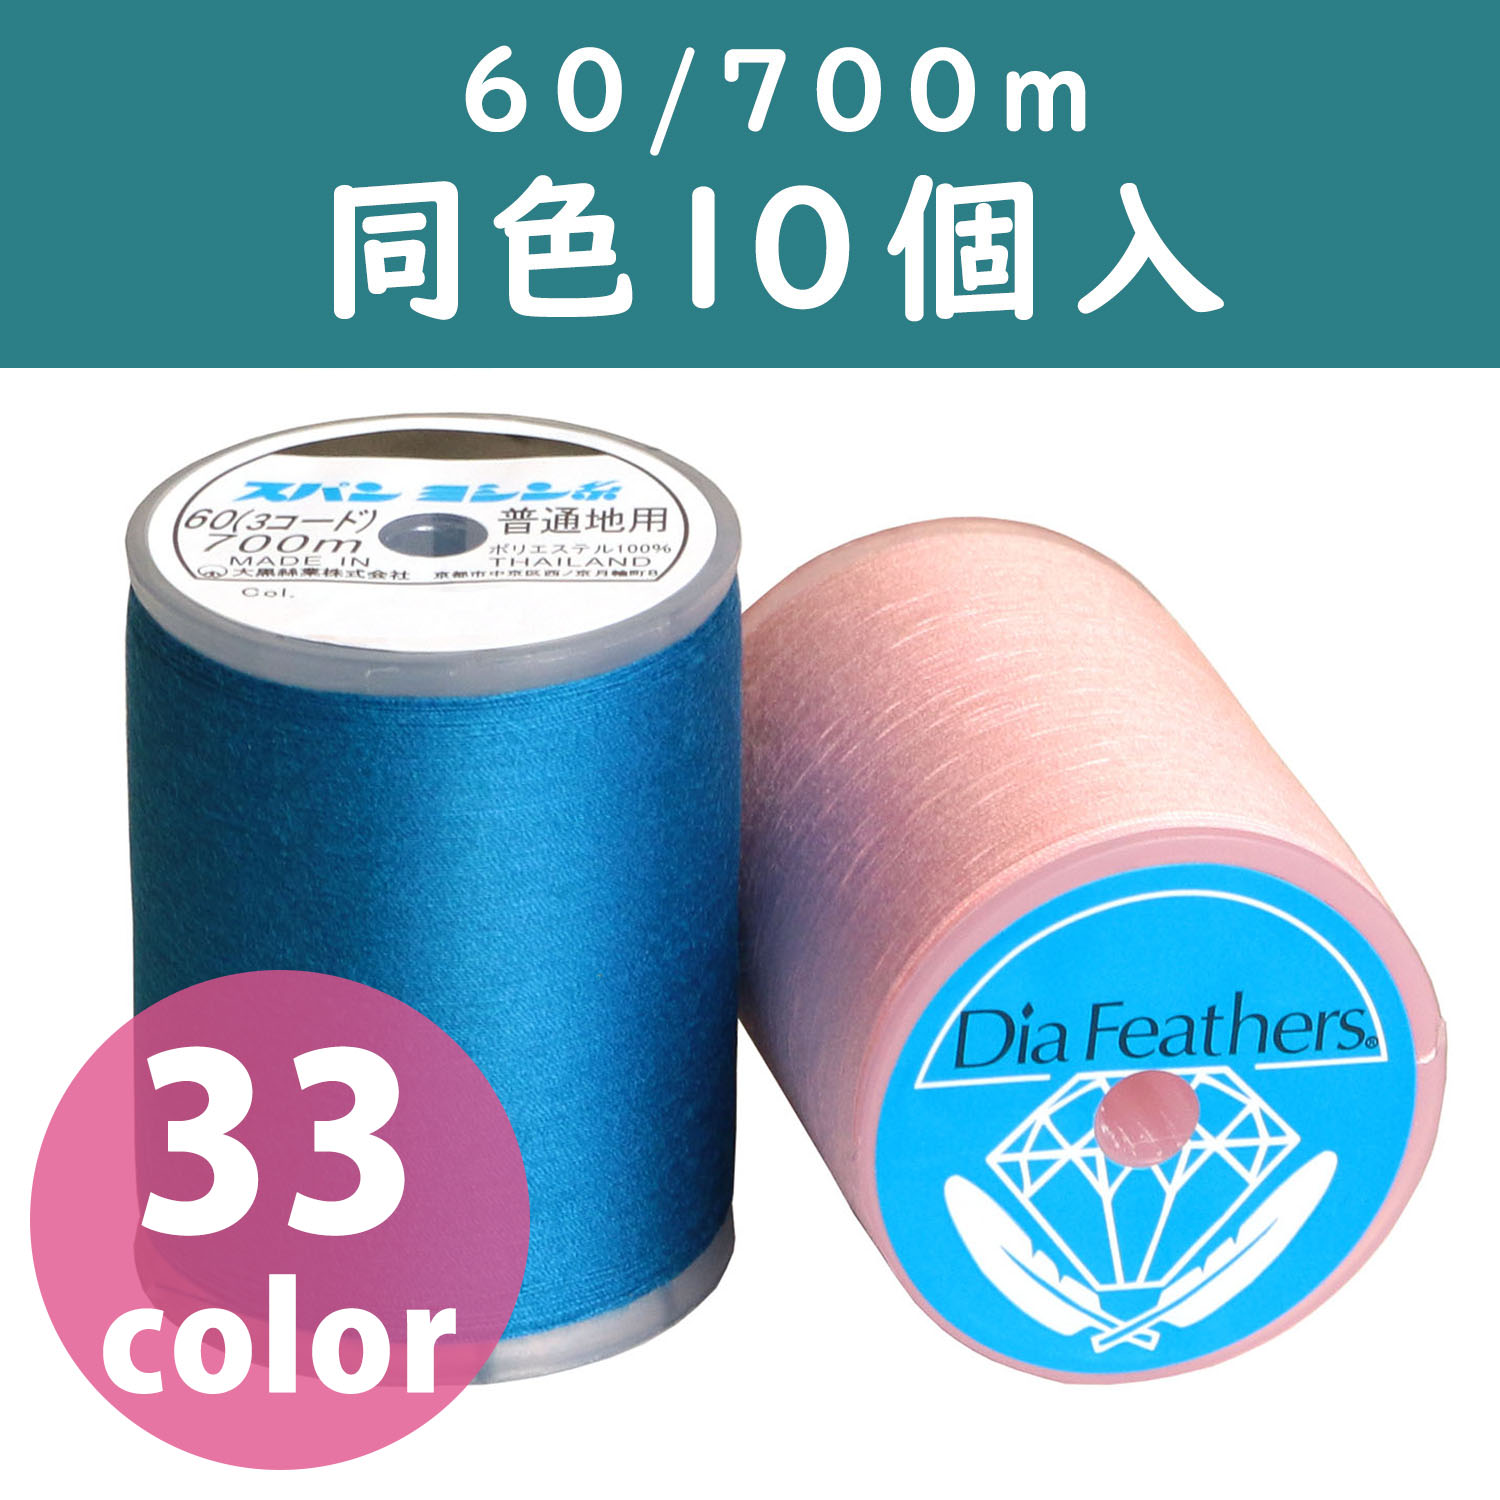 DKS24-10 Household Span Sewing Thread #60/700m """",10 pcs of same color/box (box)